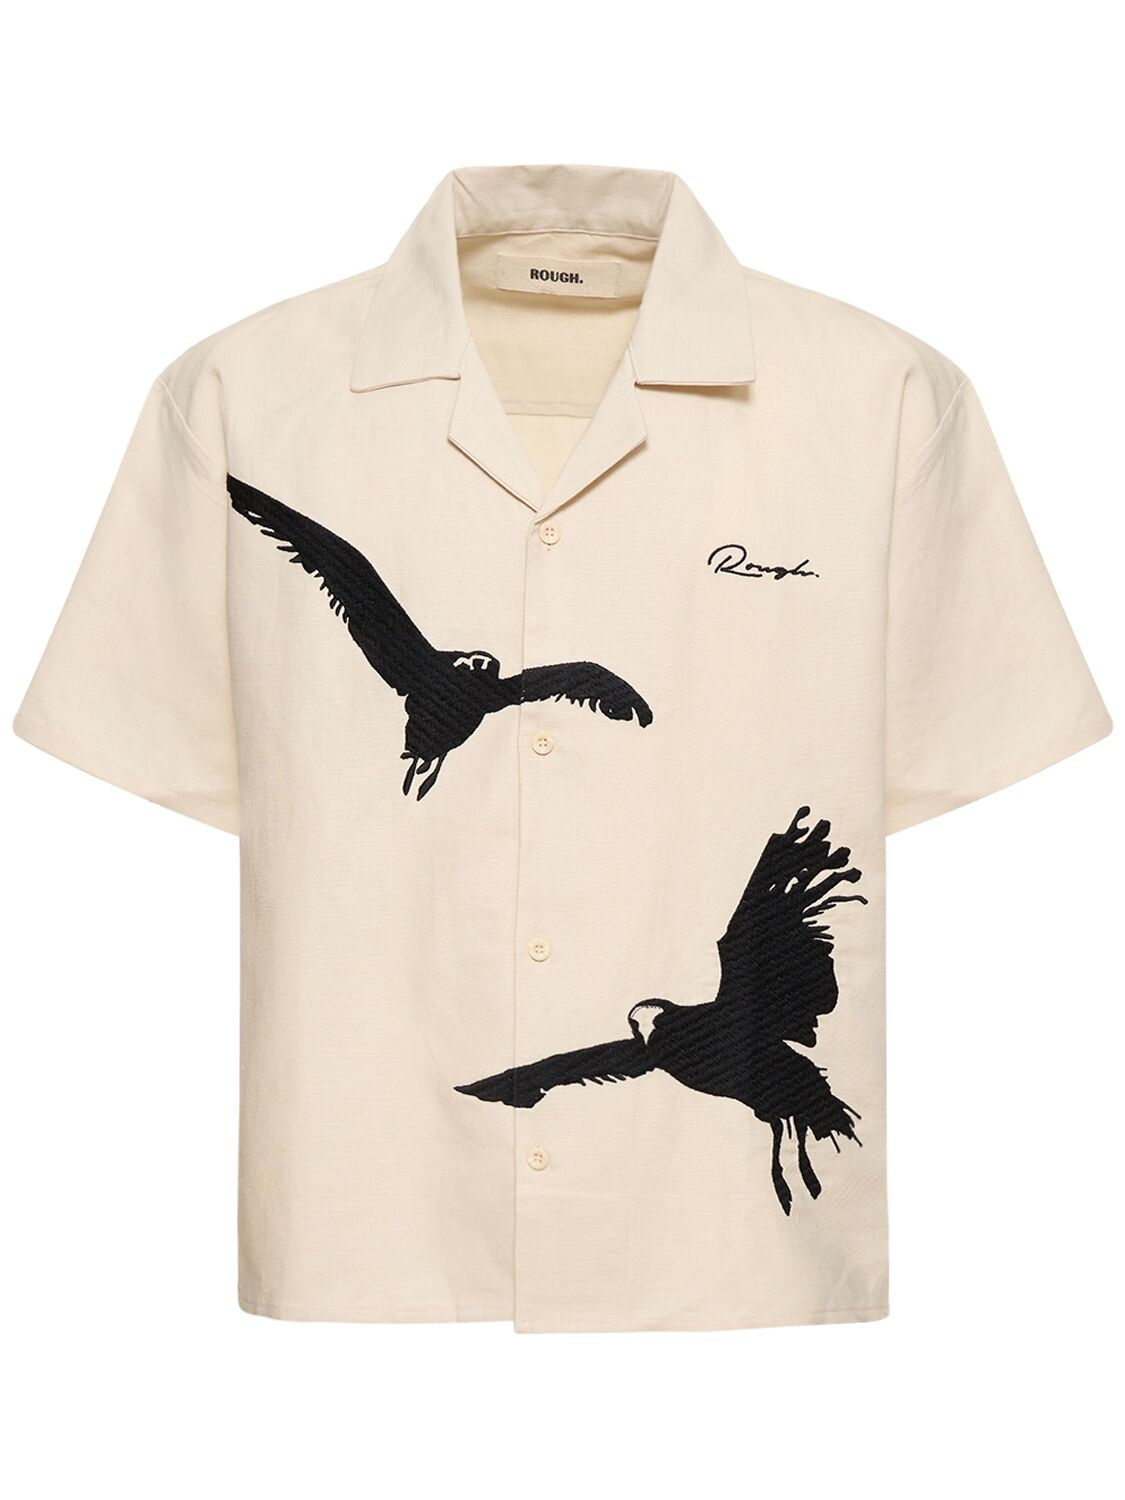 Seagull Embroidered Cotton Shirt – MEN > CLOTHING > SHIRTS